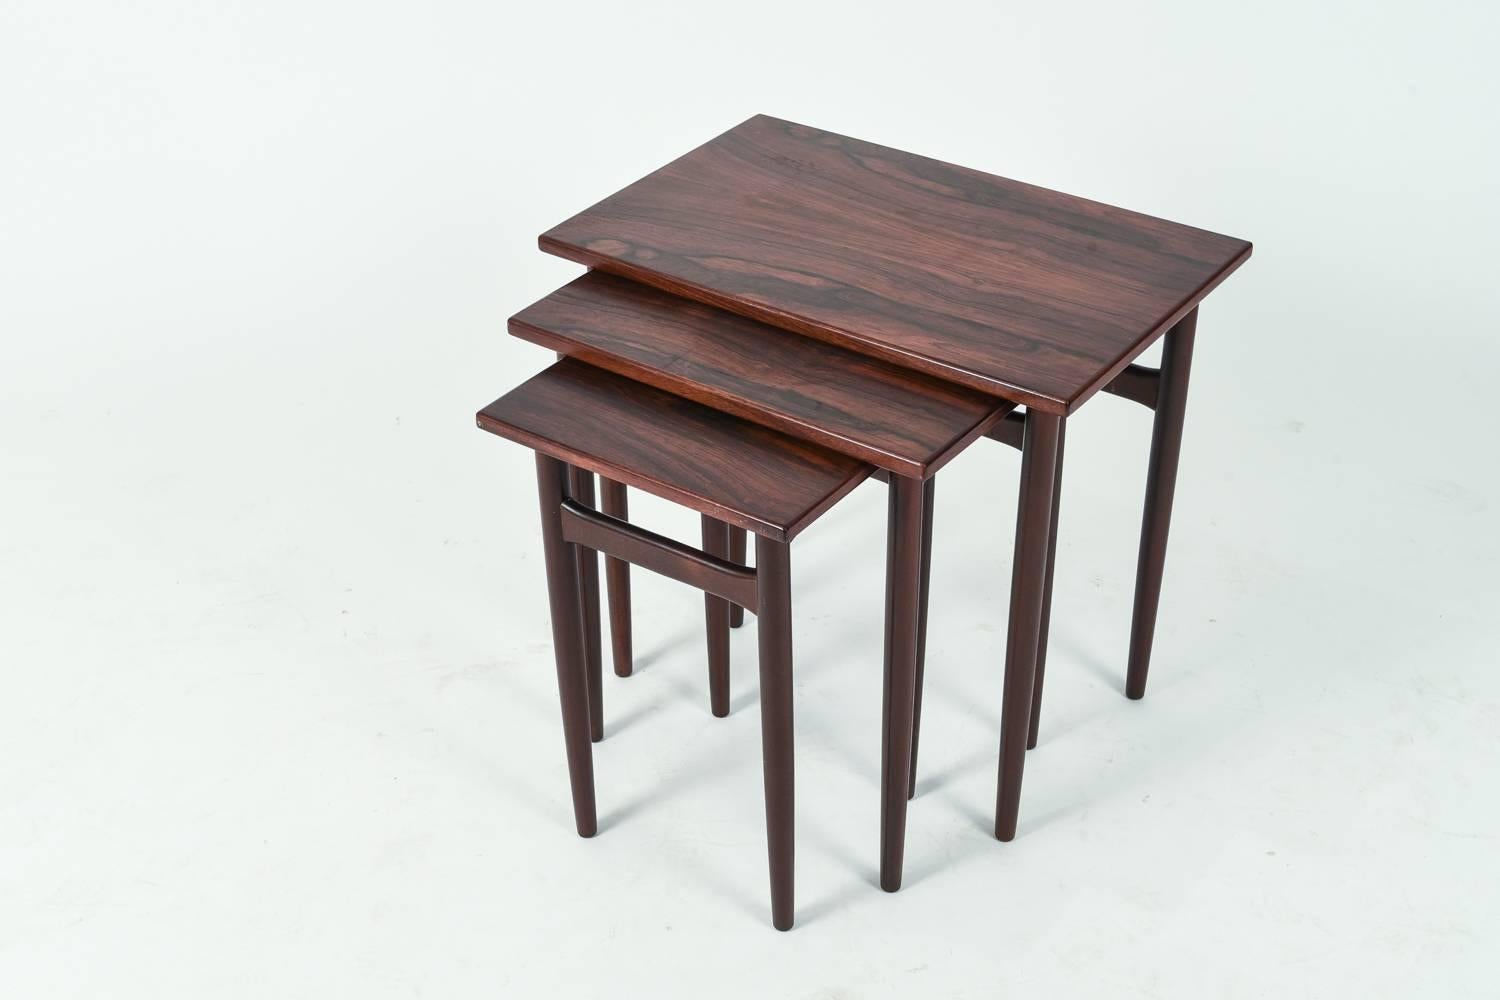 This is a beautiful set of three Danish Mid-Century nesting tables in handsome rosewood.